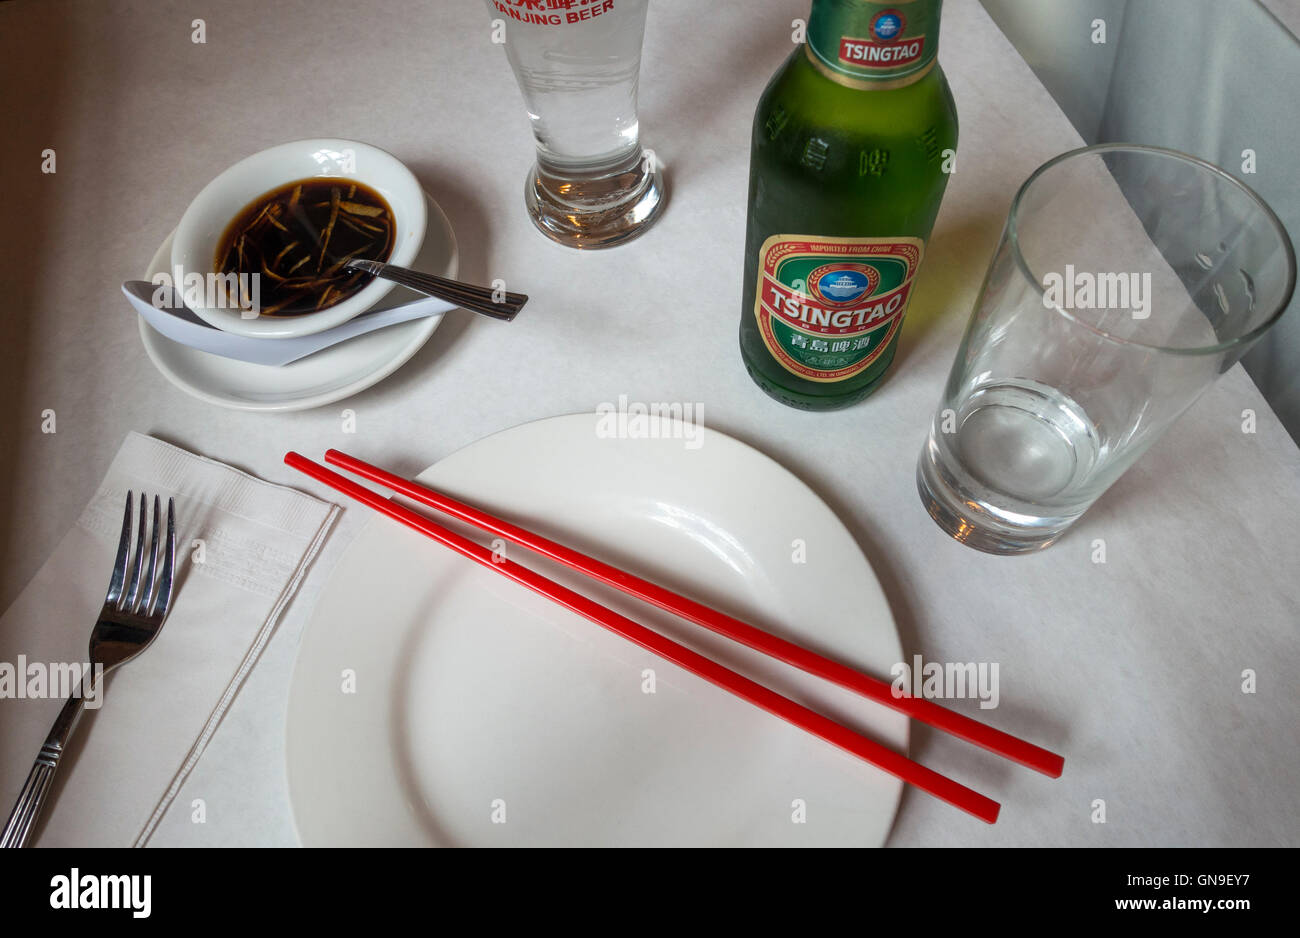 Tsingtao Chinese beer at a restaurant in Chinatown, New York City Stock Photo